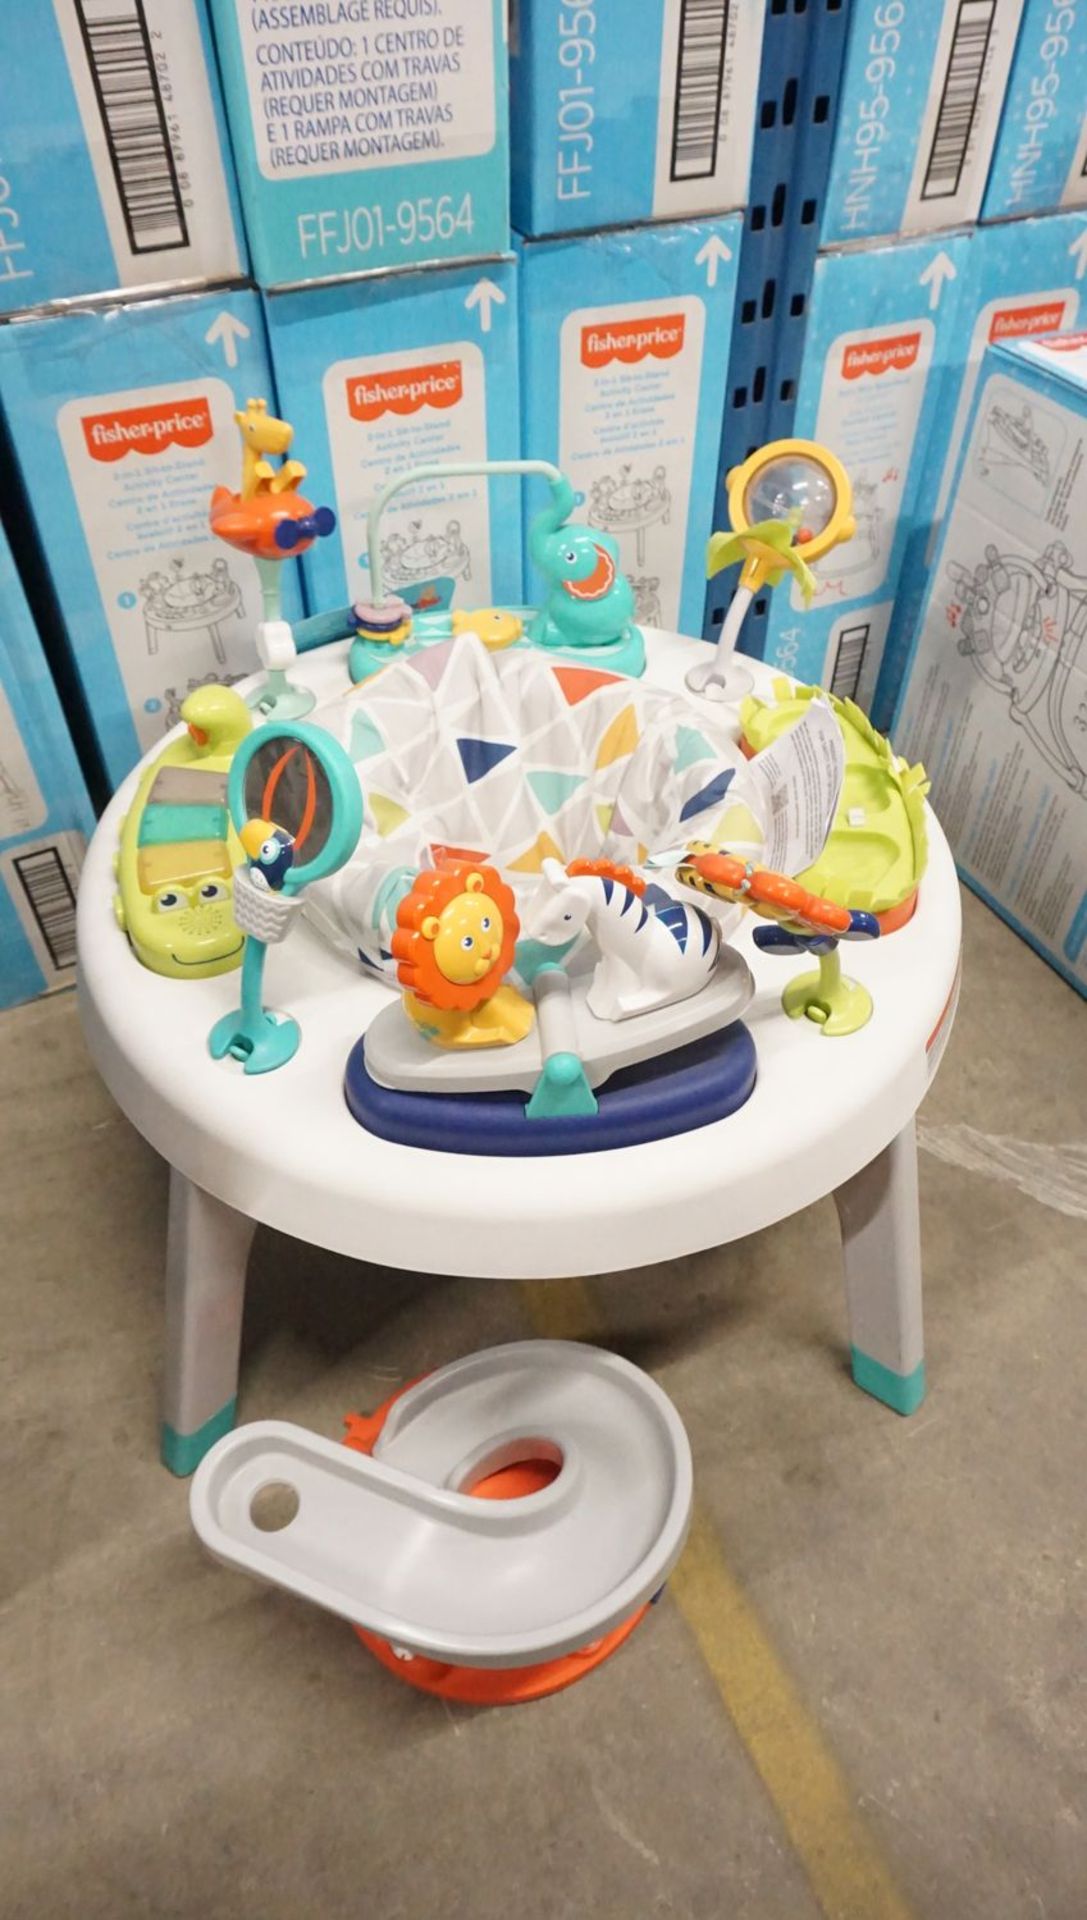 FISHER PRICE 2-IN-1 SIT & STAND ACTIVITY CENTRE (FFJ01-9564) (MSRP 129.99) - Image 3 of 3